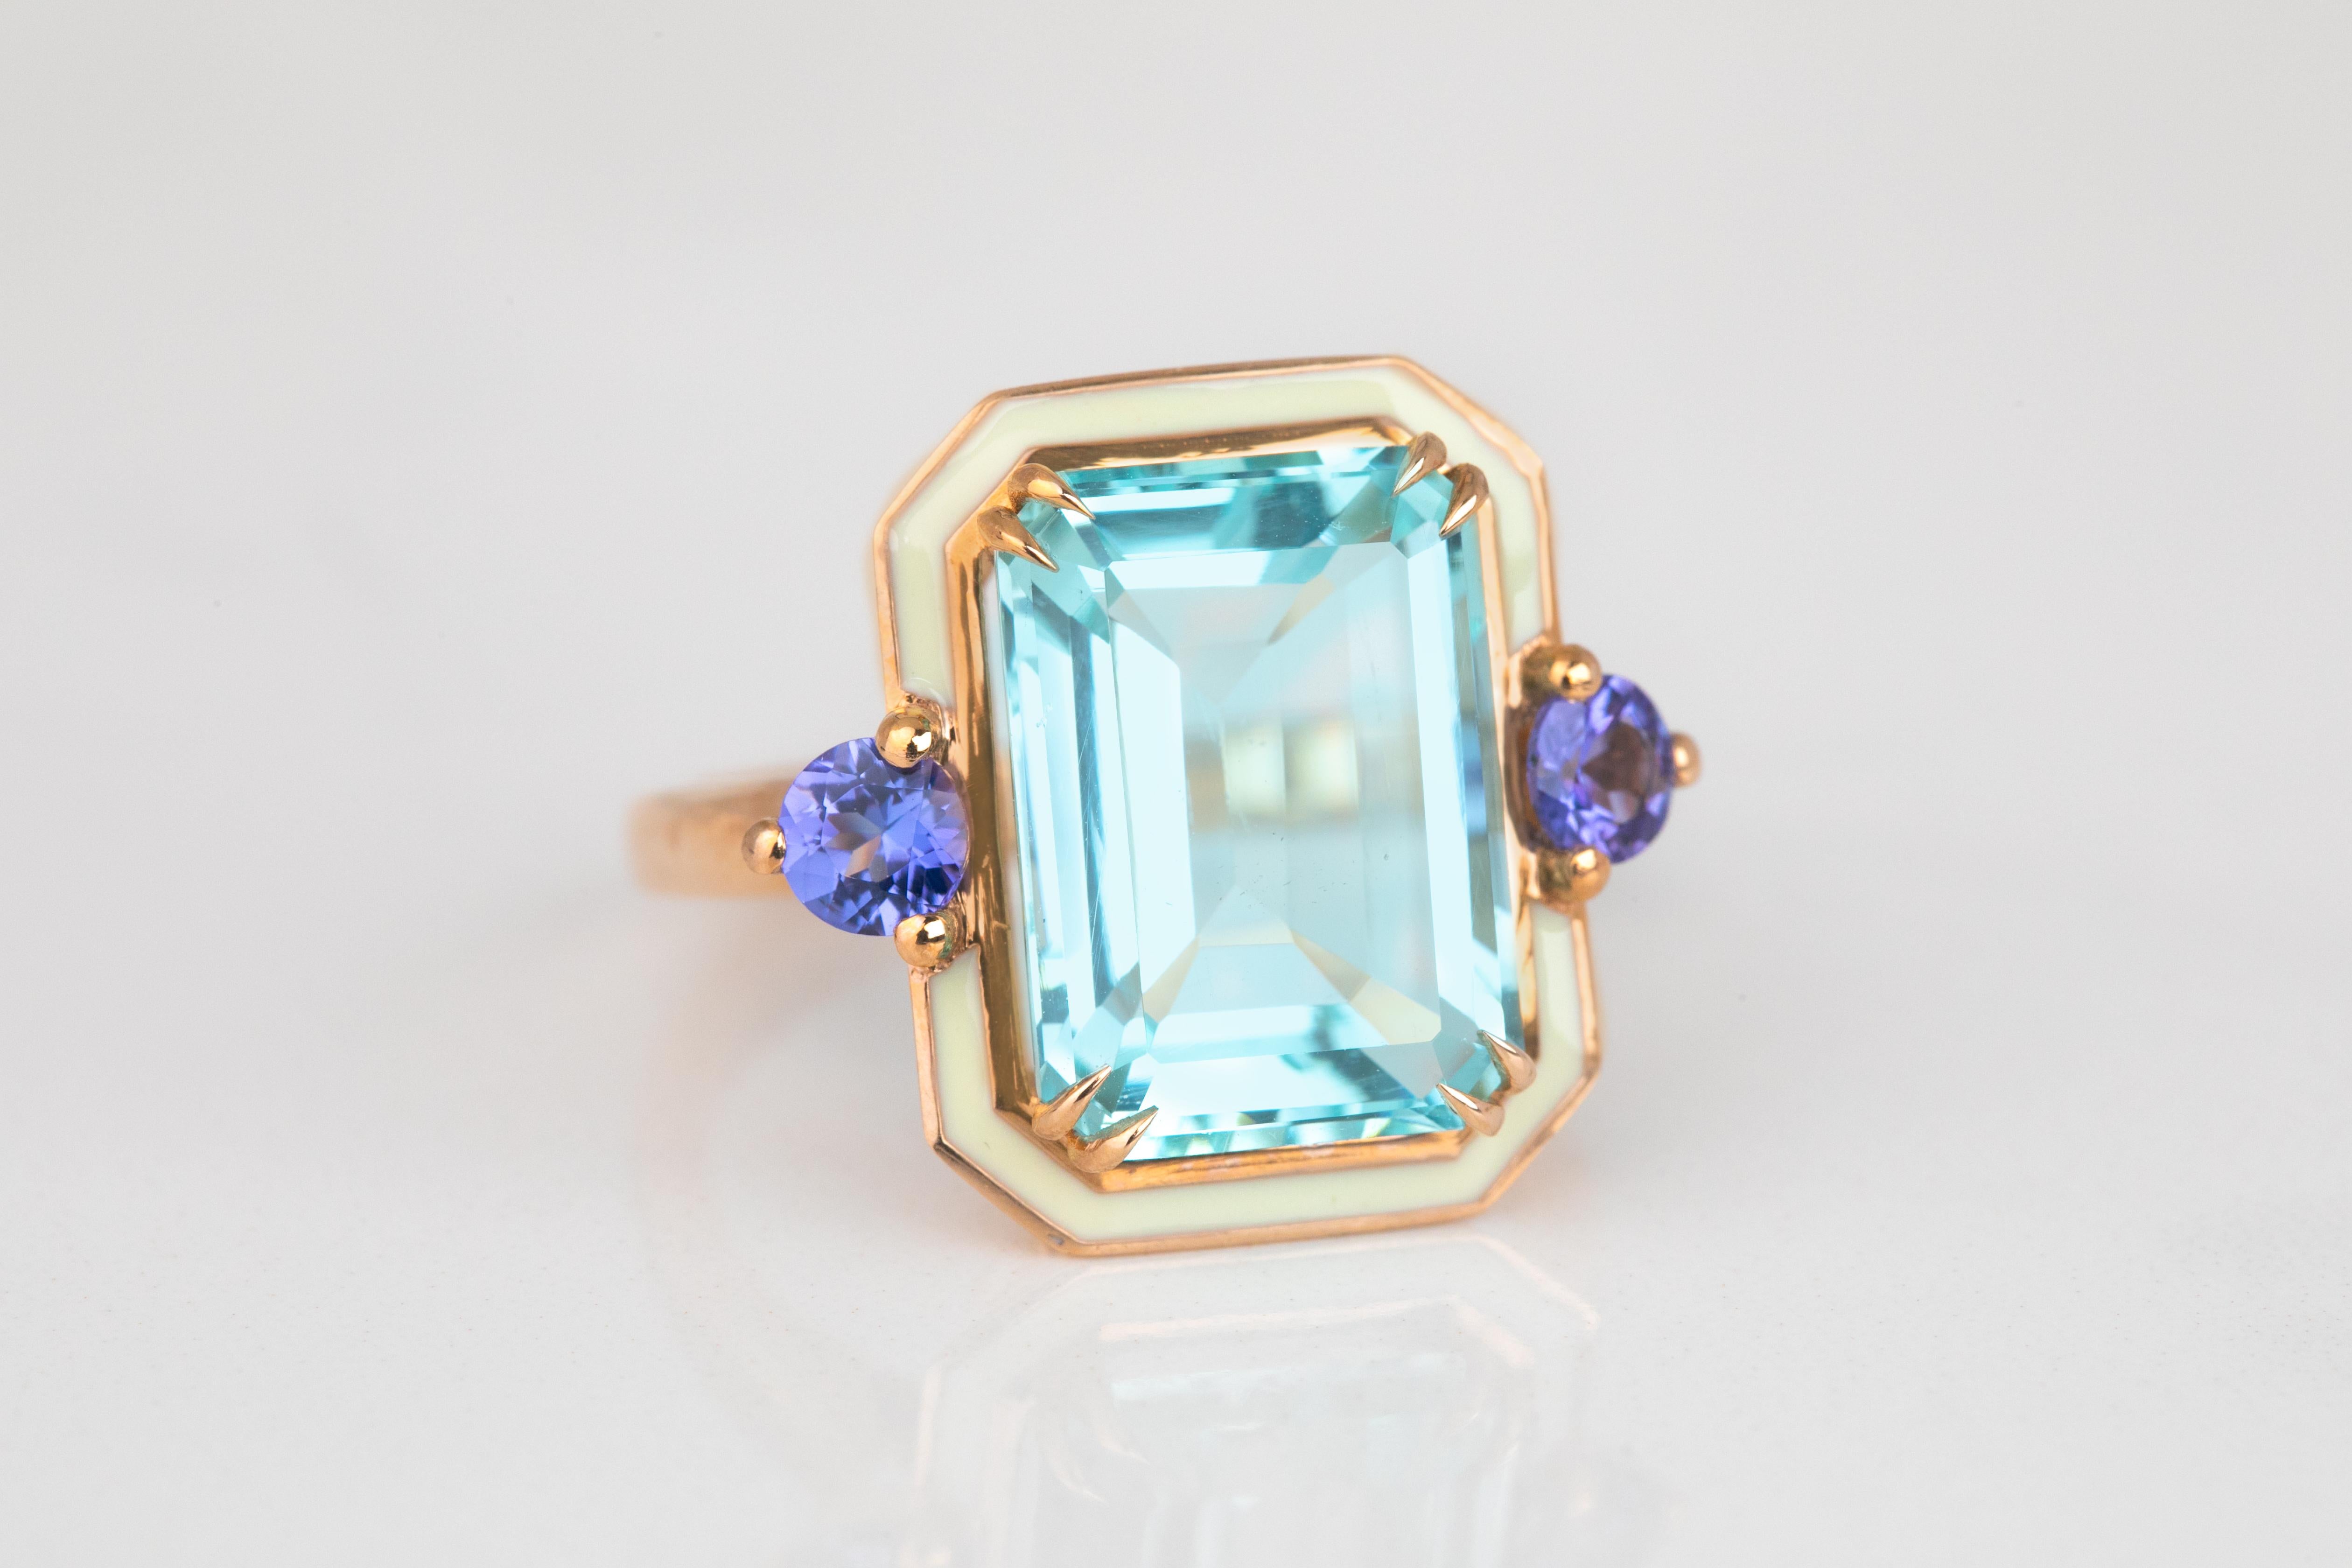 For Sale:  Art Deco Style 14k Rose Gold Ring 6.13ct Sky Topaz and 0.40ct Ceylon Sapphire 2